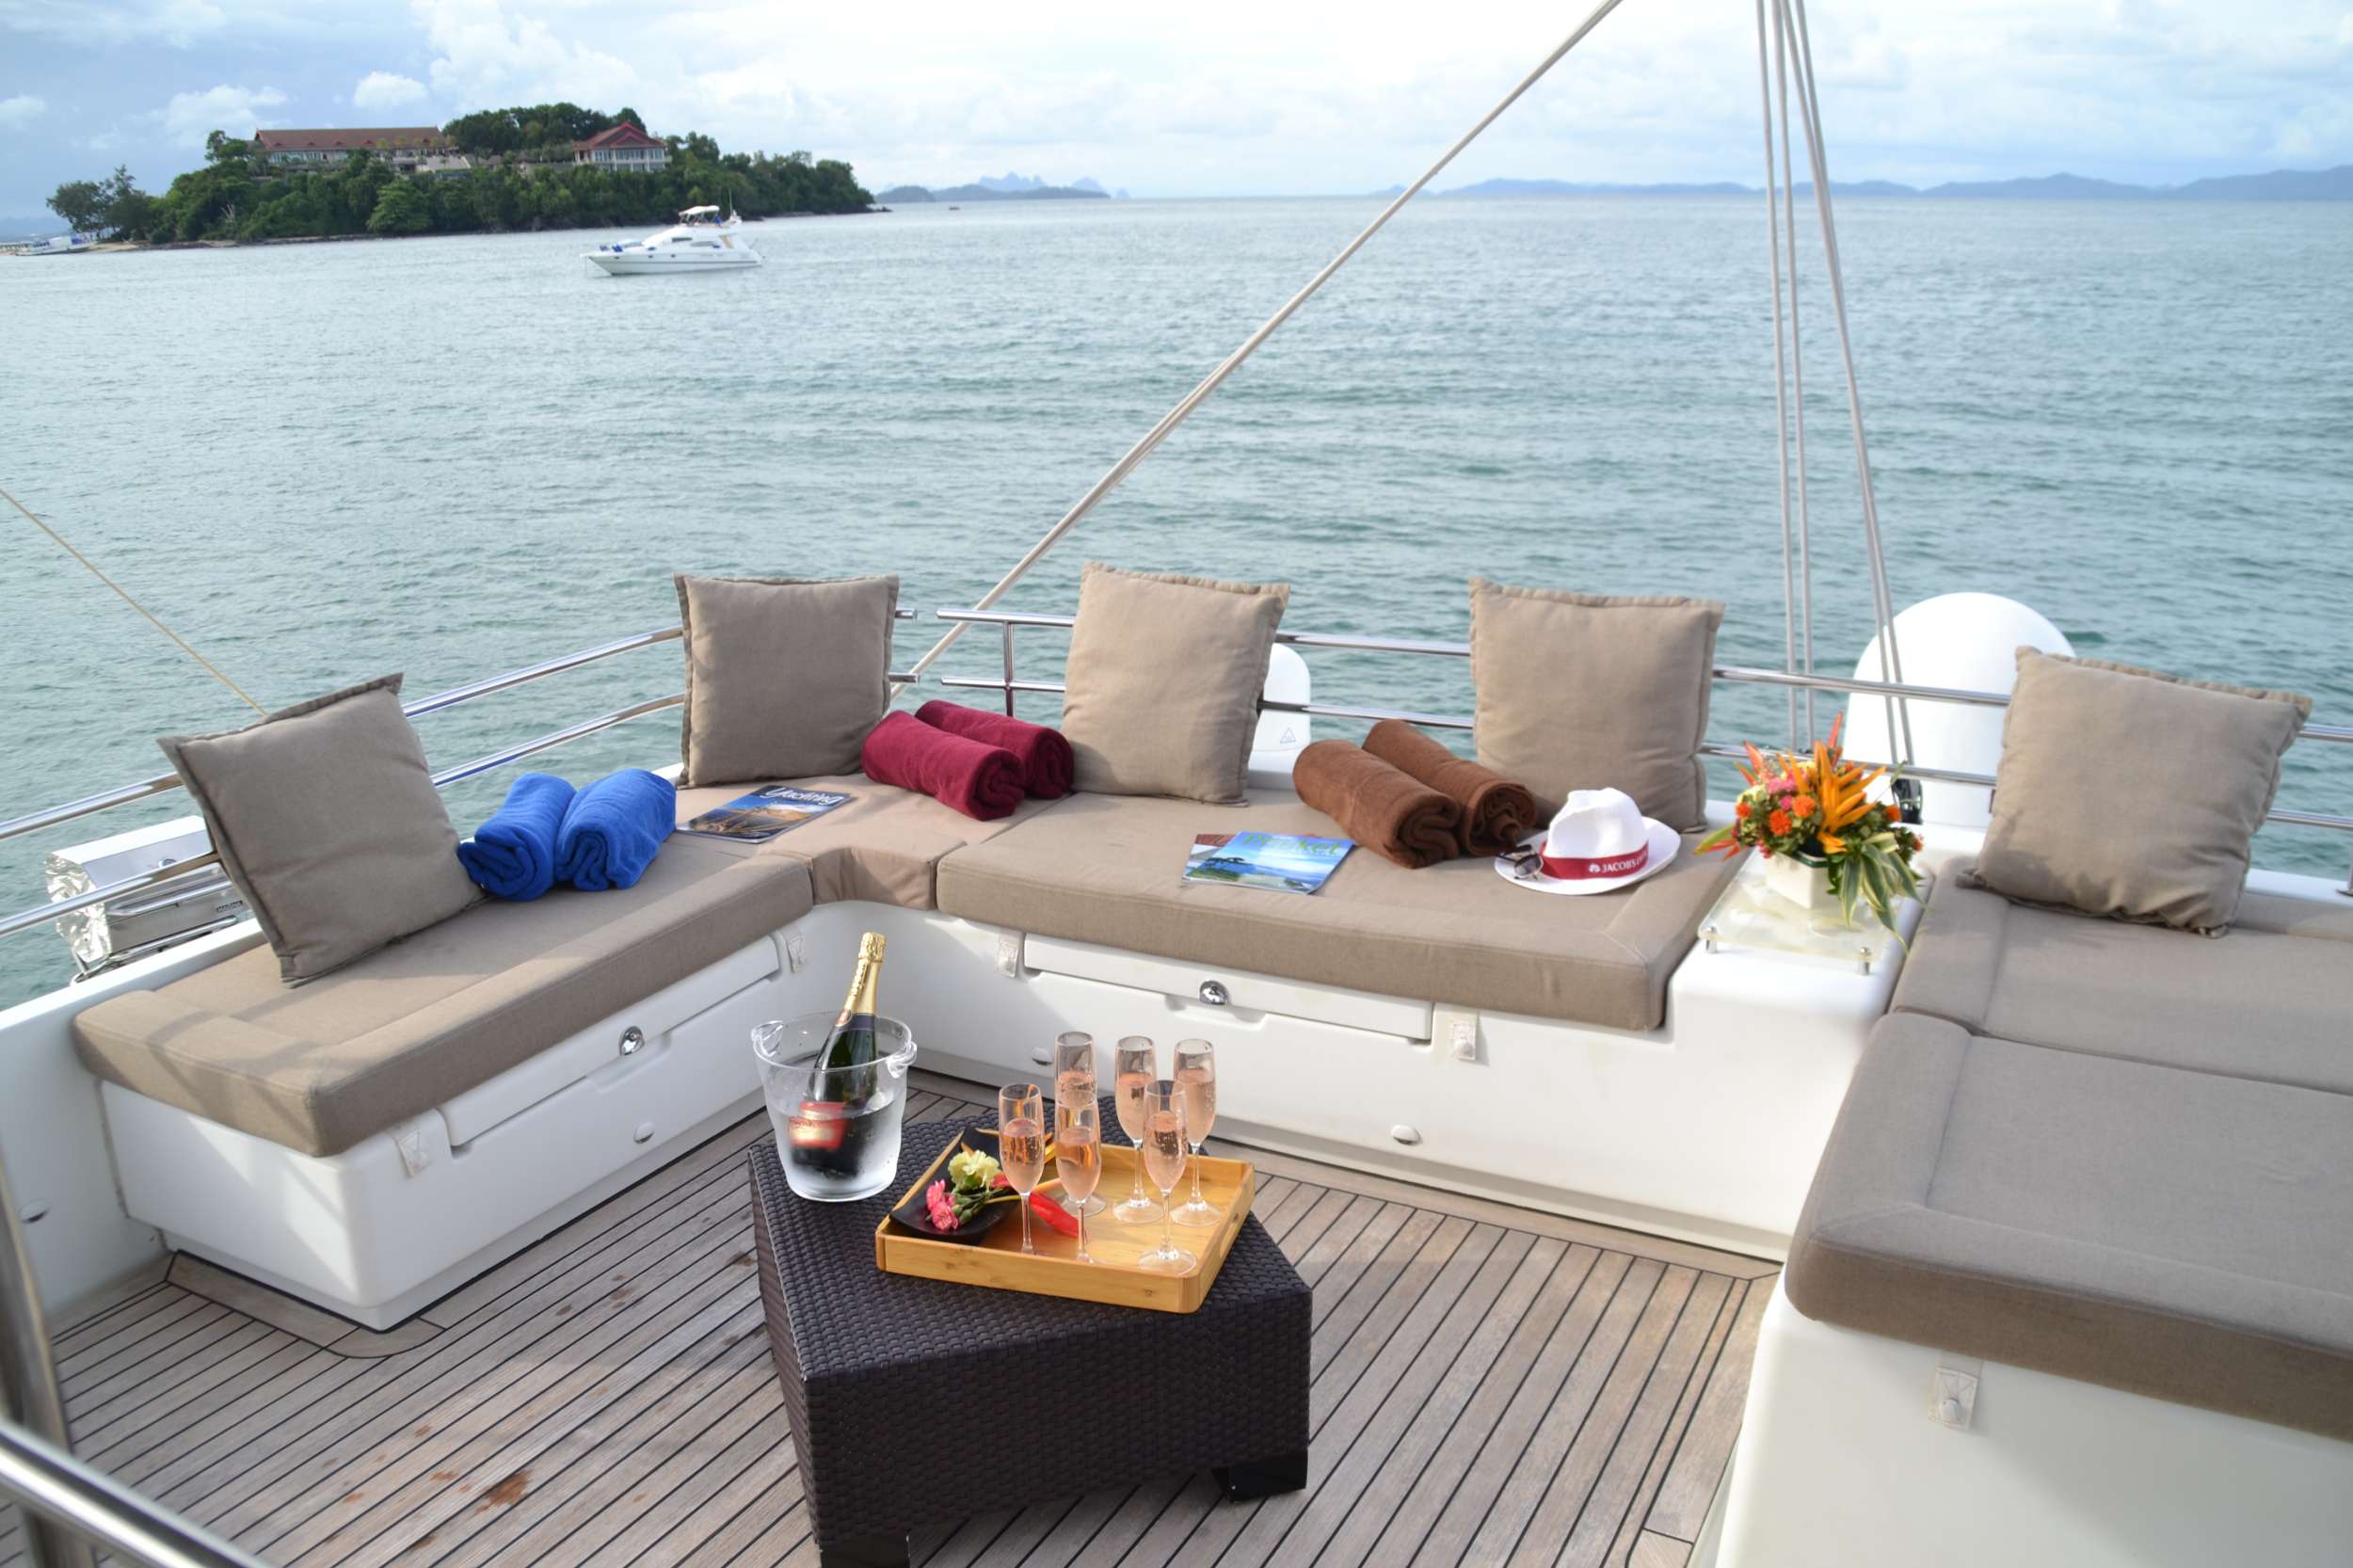 00SEVEN - Yacht Charter Langkawi & Boat hire in SE Asia 5